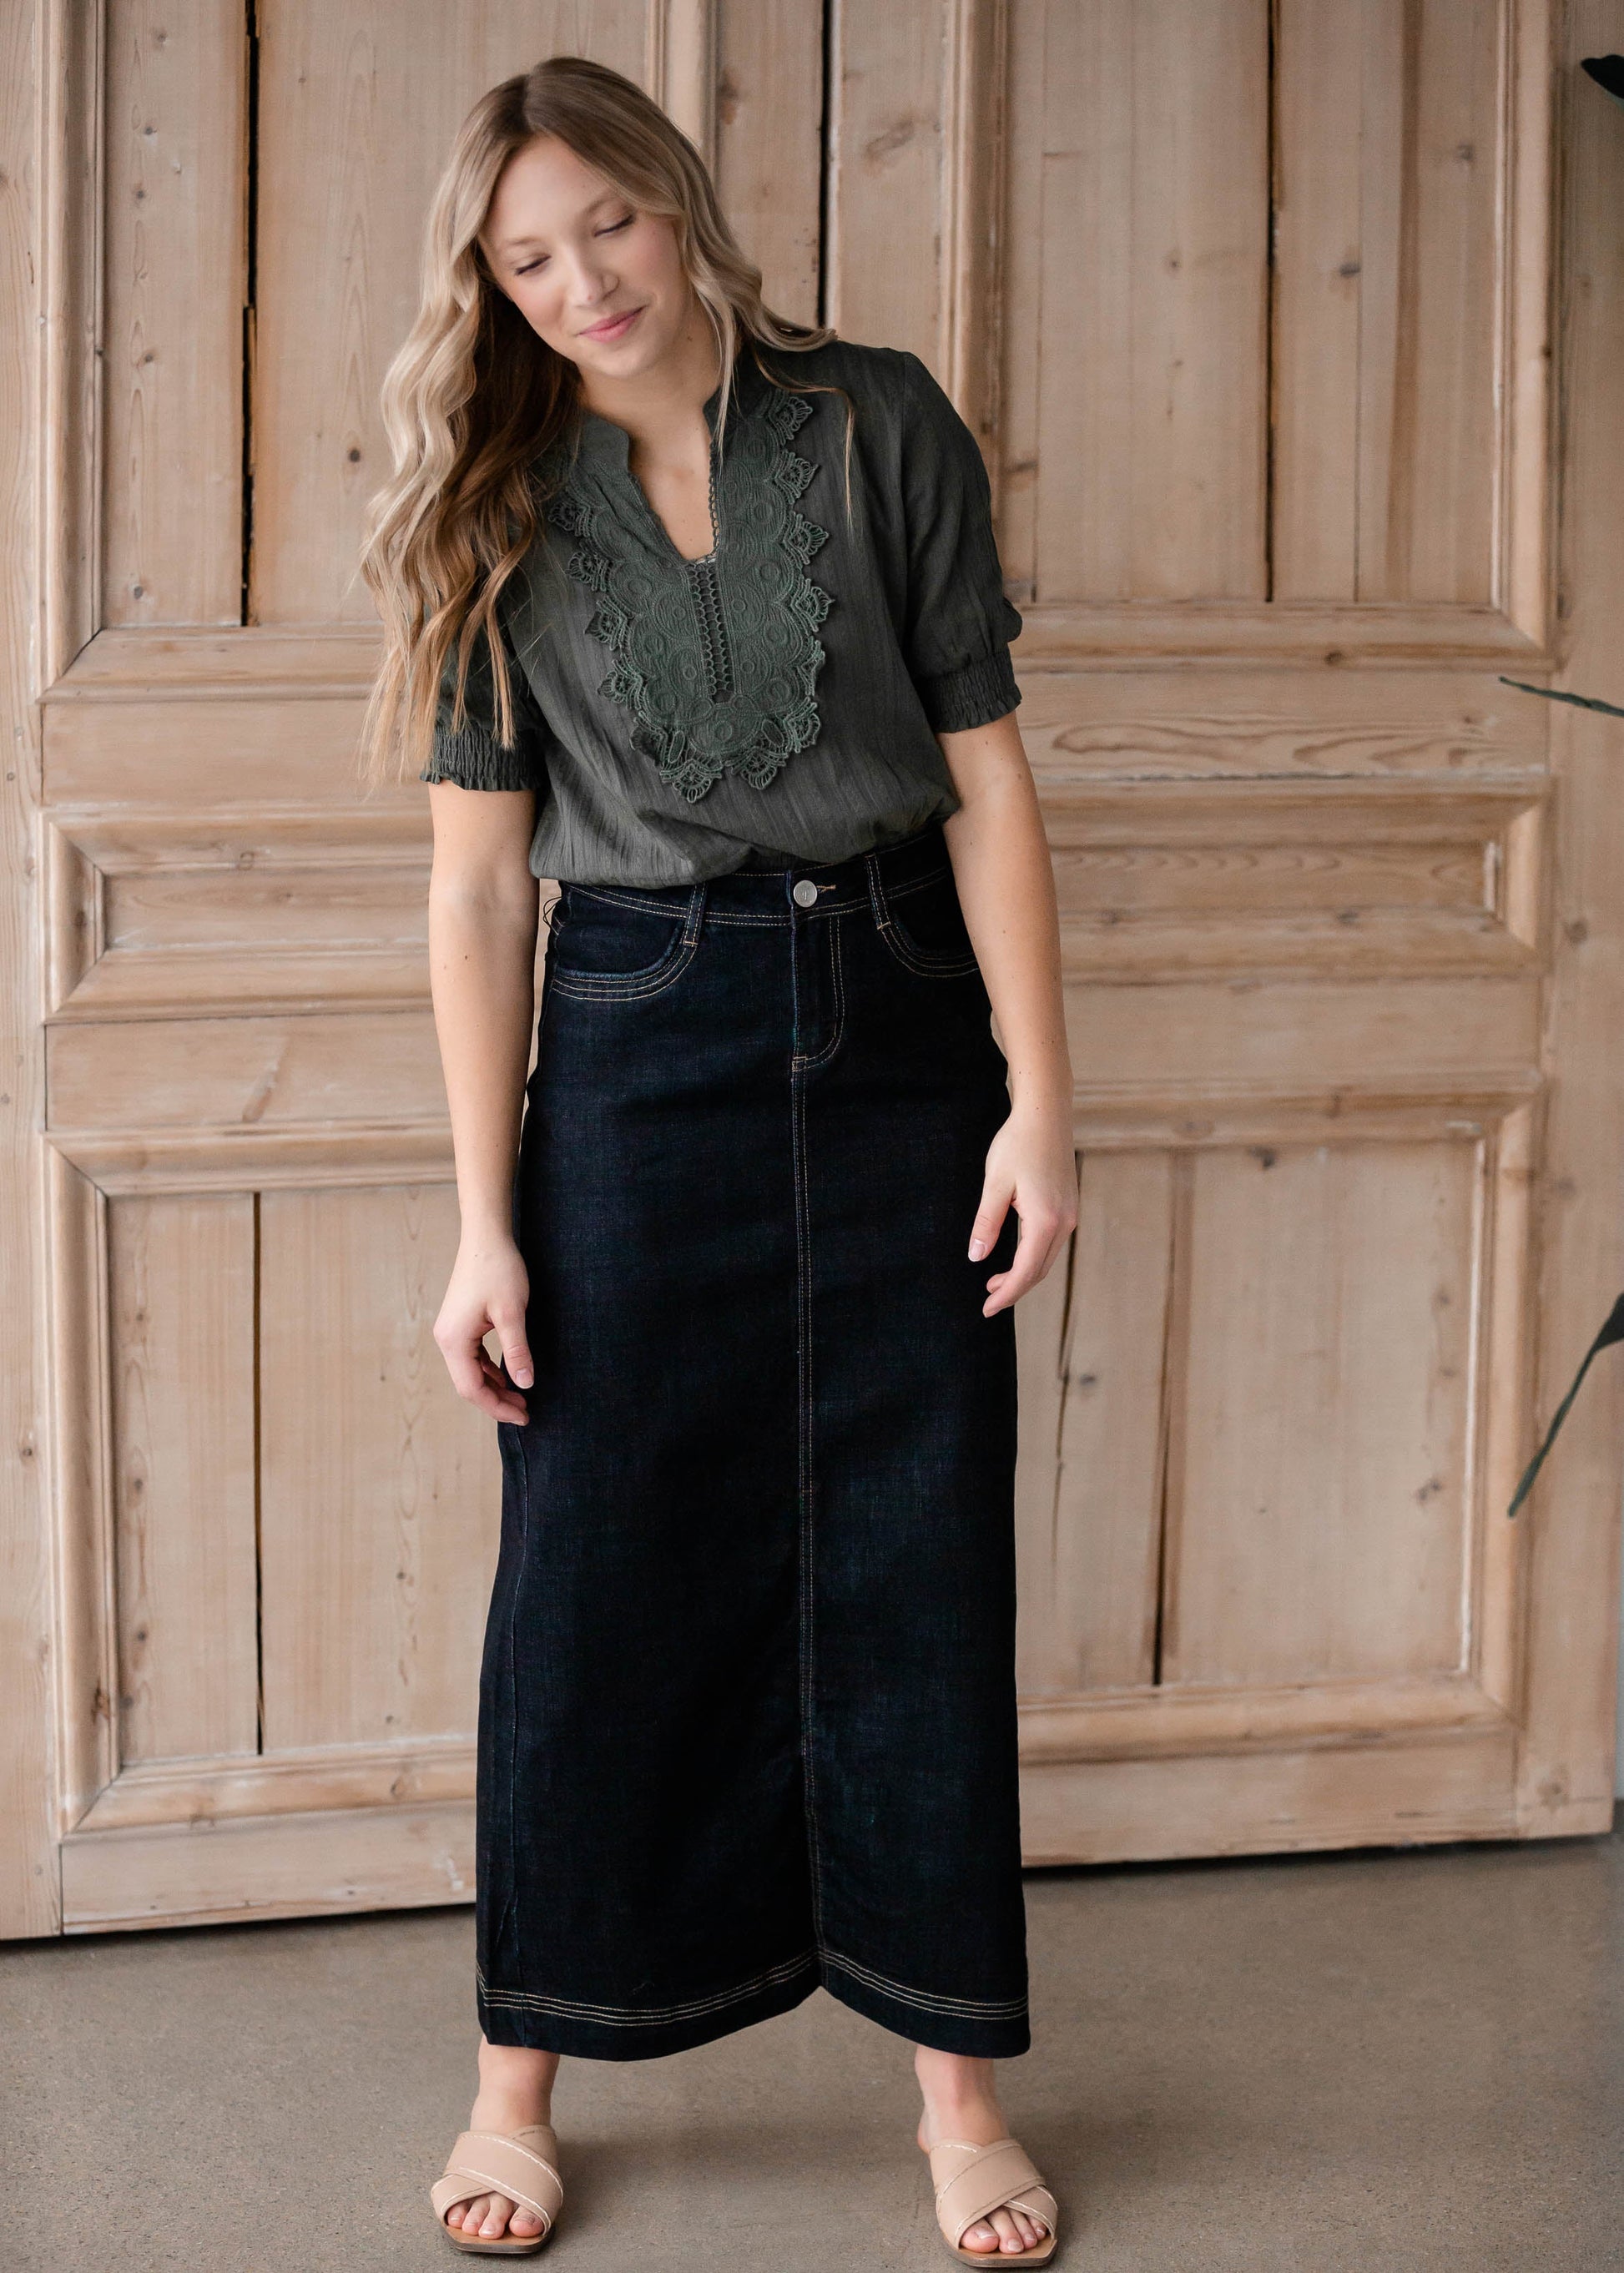 The Beth Dark Wash Long Denim Skirt is an Inherit Design made with you in mind! The dark wash is easy to dress up and details make this a stand out skirt! There is a triple stitch detail on the bottom hem and an Inherit logo patch on the back waistband! A straight fit with a slit in the back makes this long denim skirt super easy to move in and to pair with any tops!